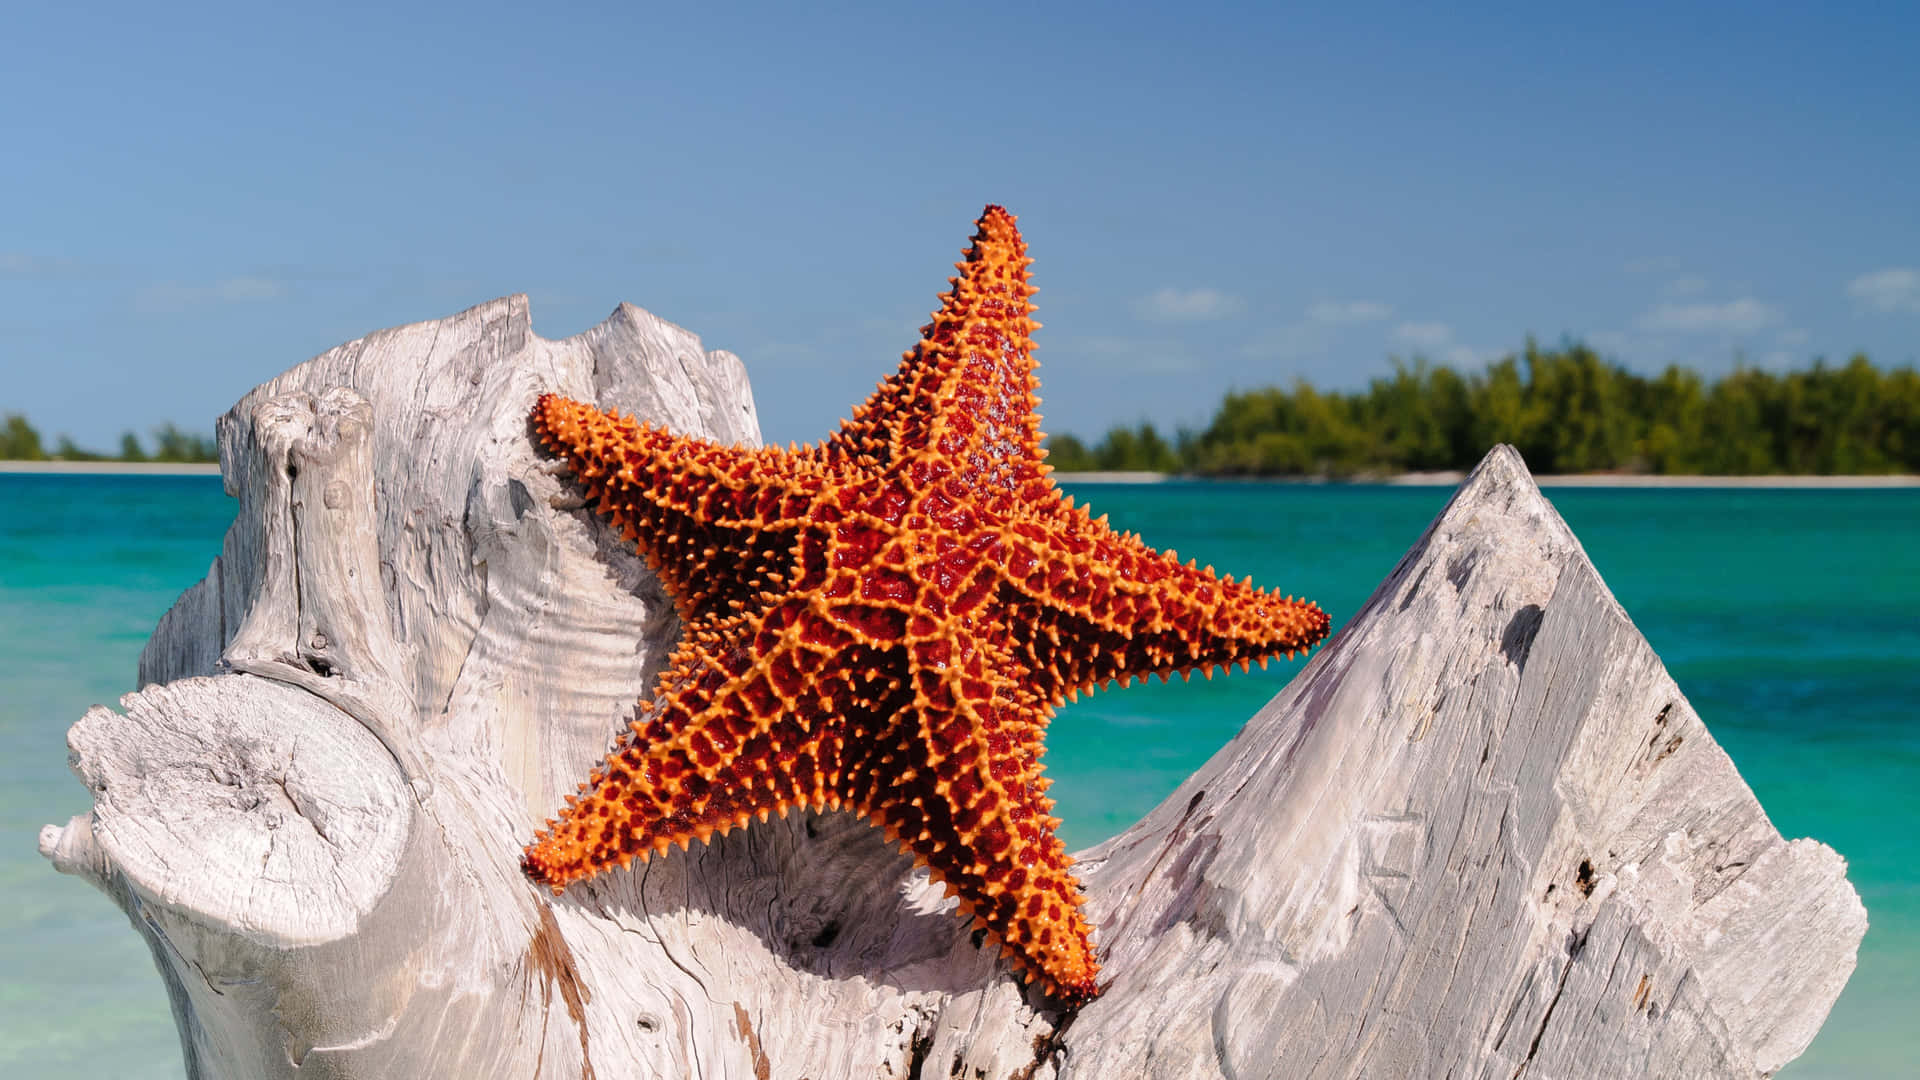 A high-definition shot of a vibrant orange starfish in its natural habitat.